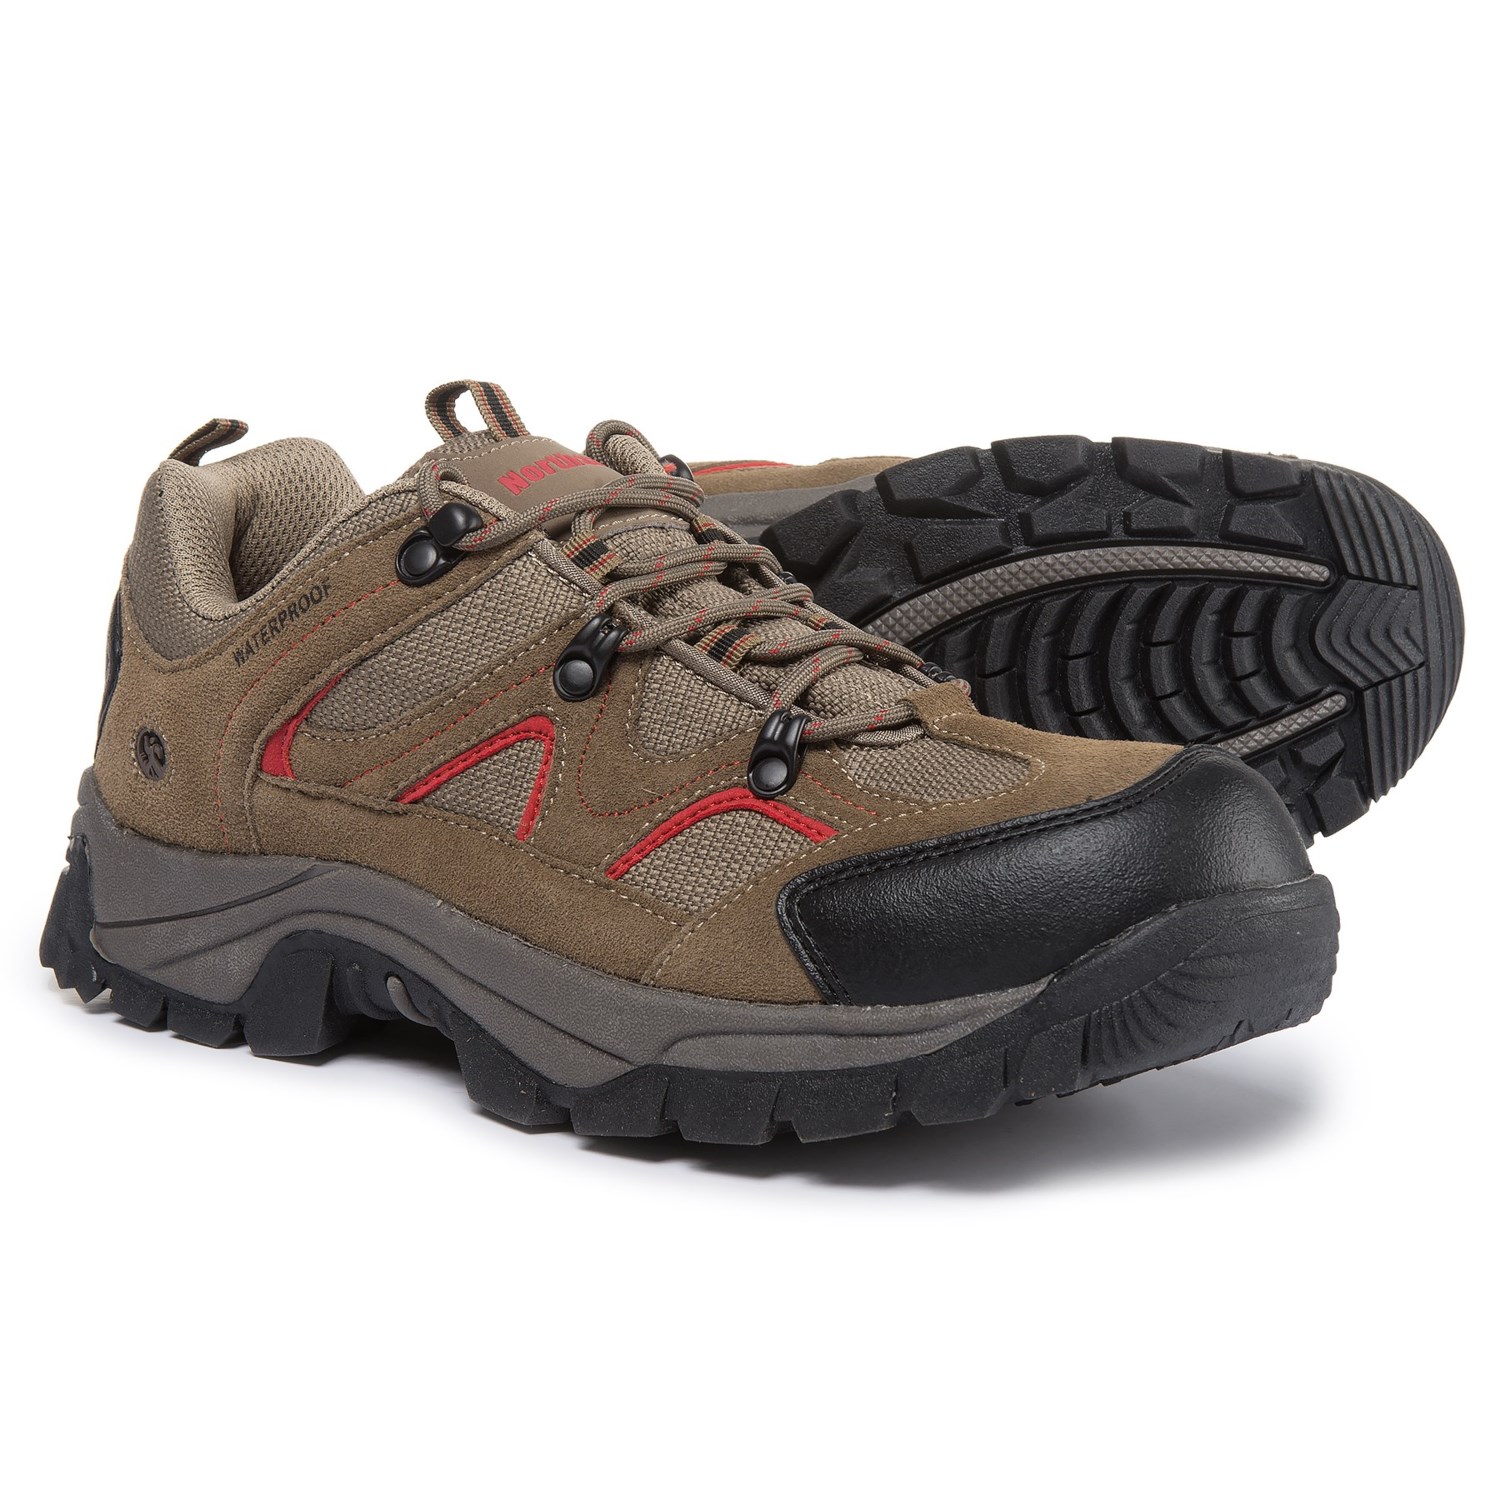 Northside Snohomish Low Hiking Shoes – Waterproof (For Men)